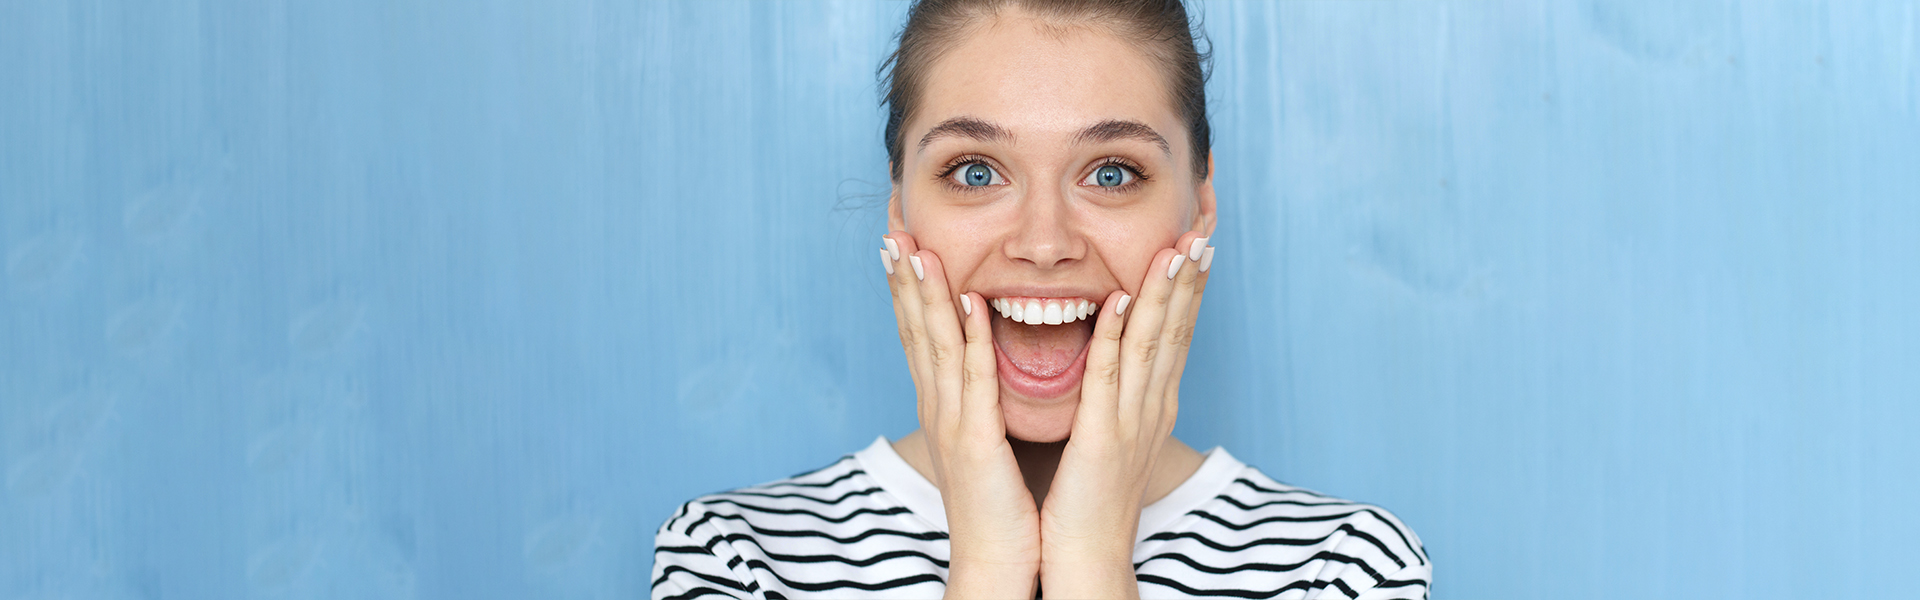 How Can You Improve Your Smile with Orthodontics?